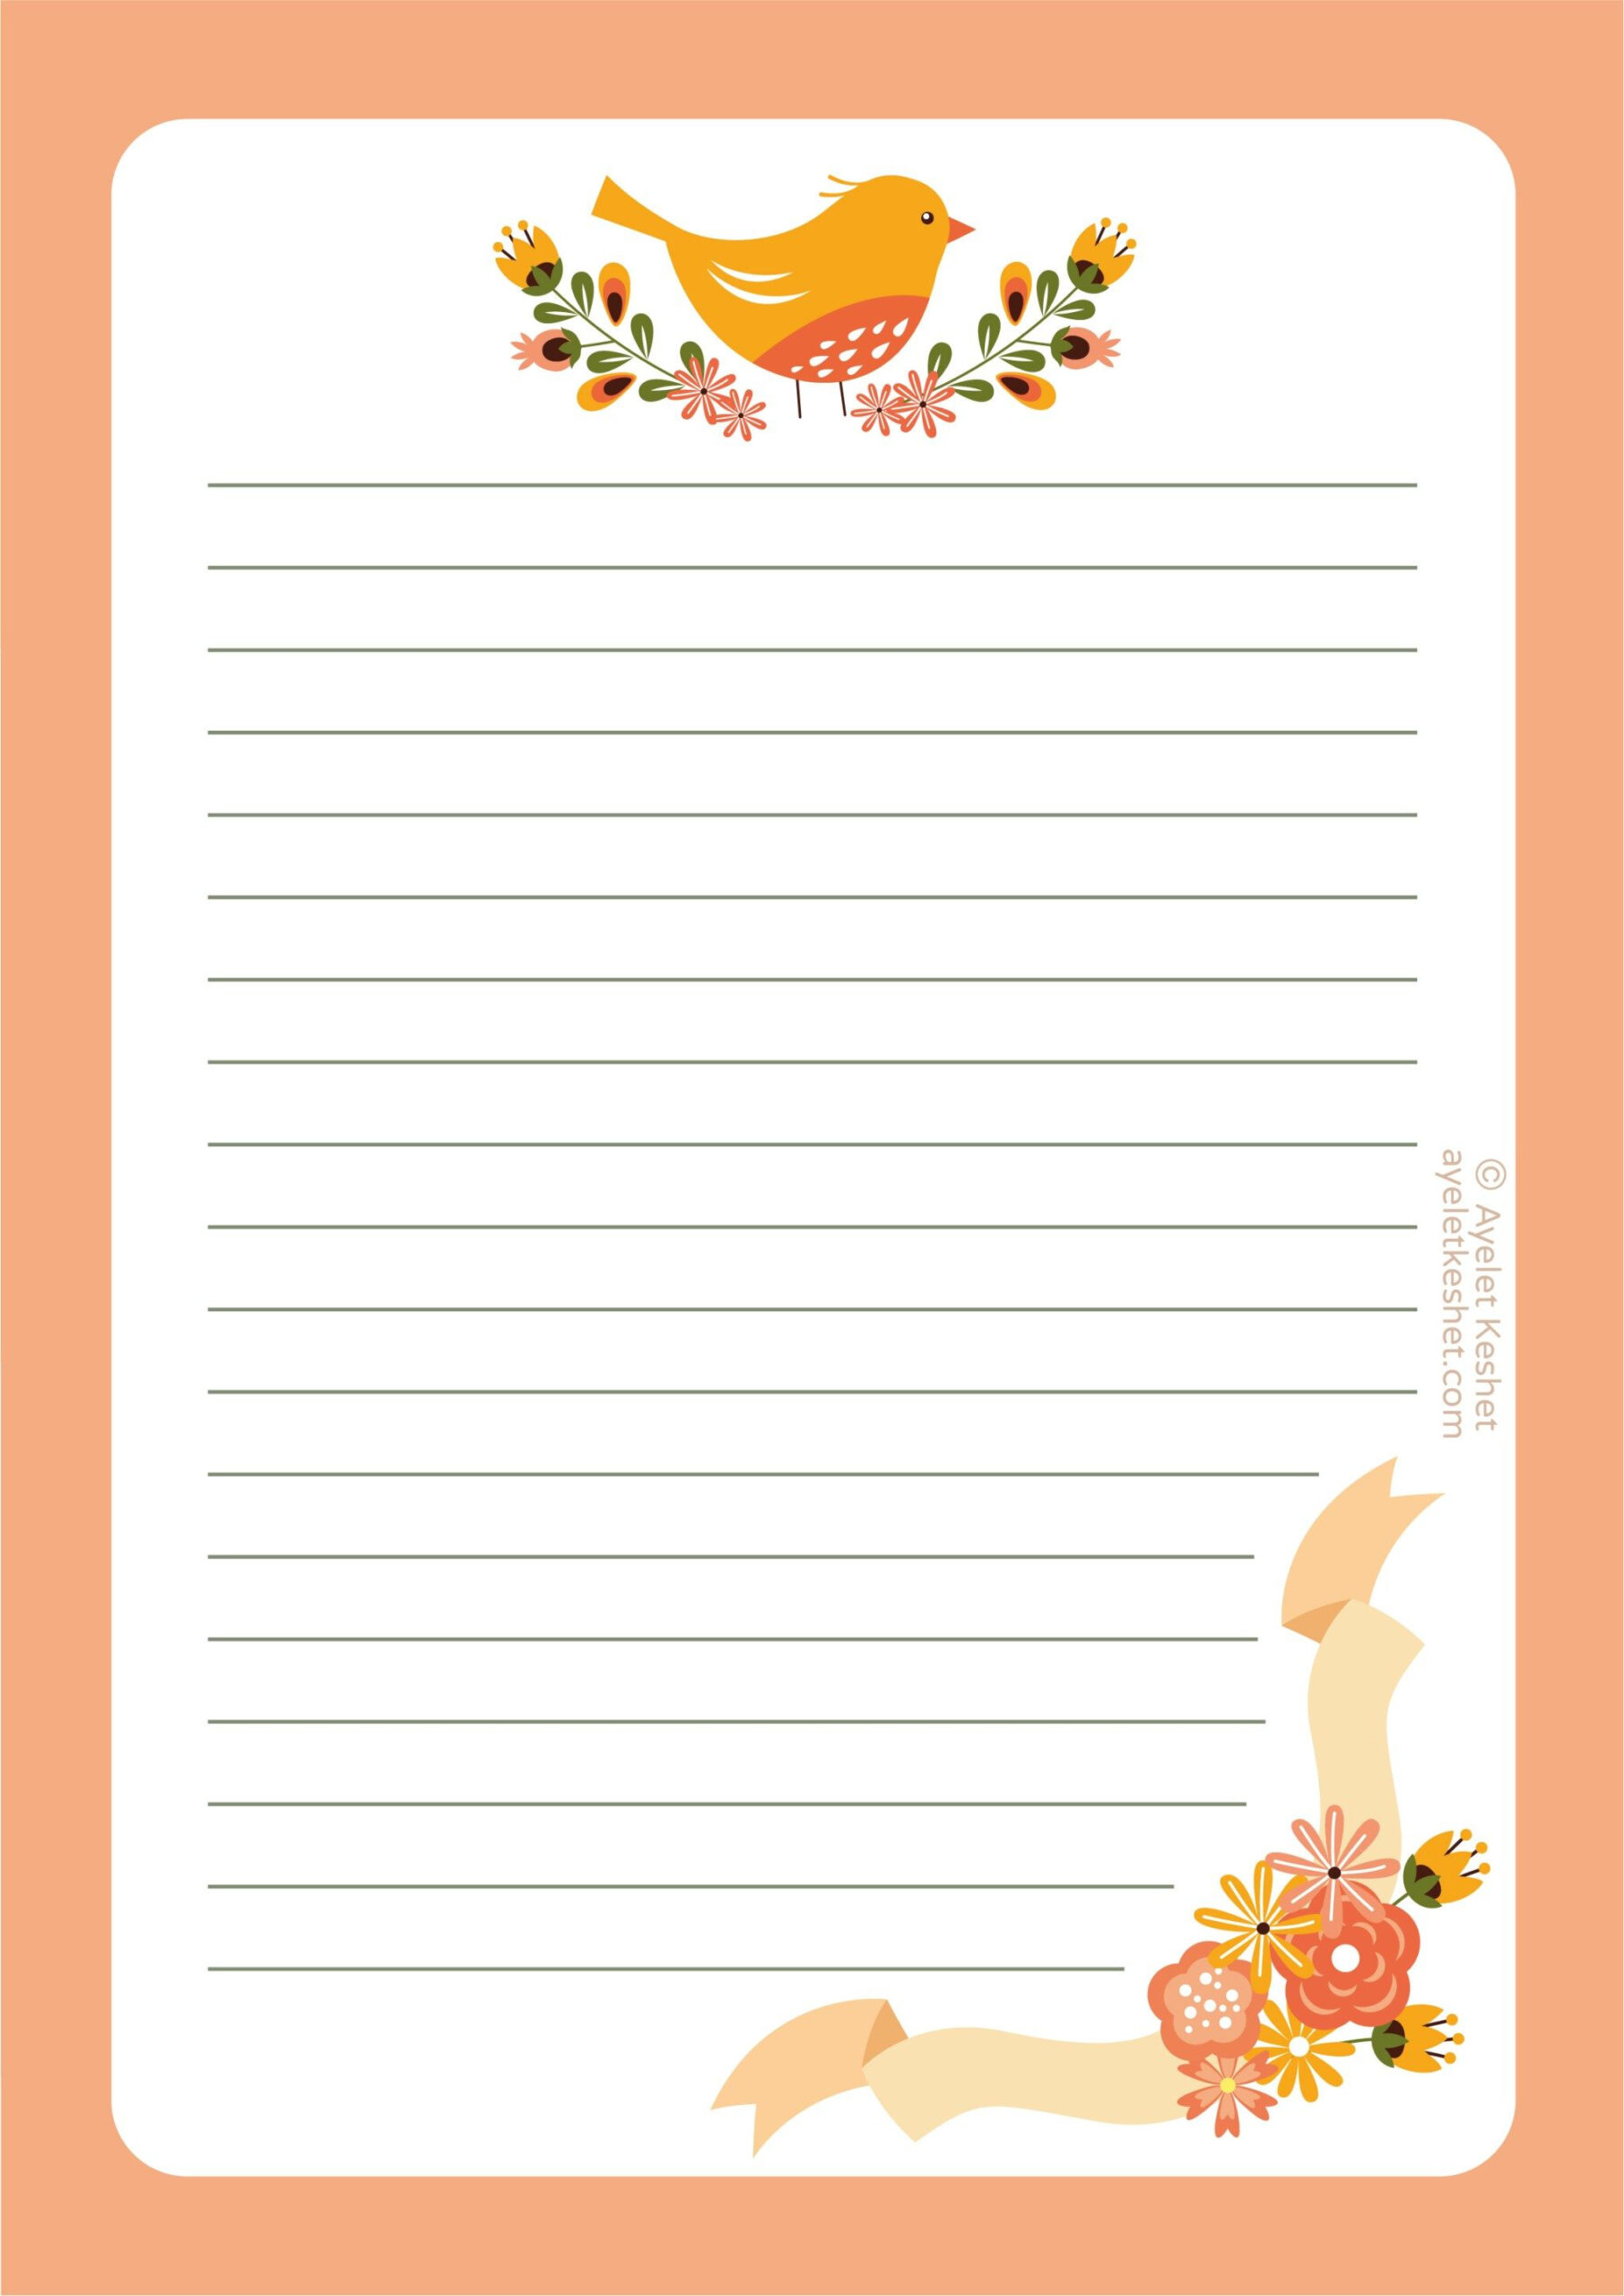 Lined Paper With Designs To Print